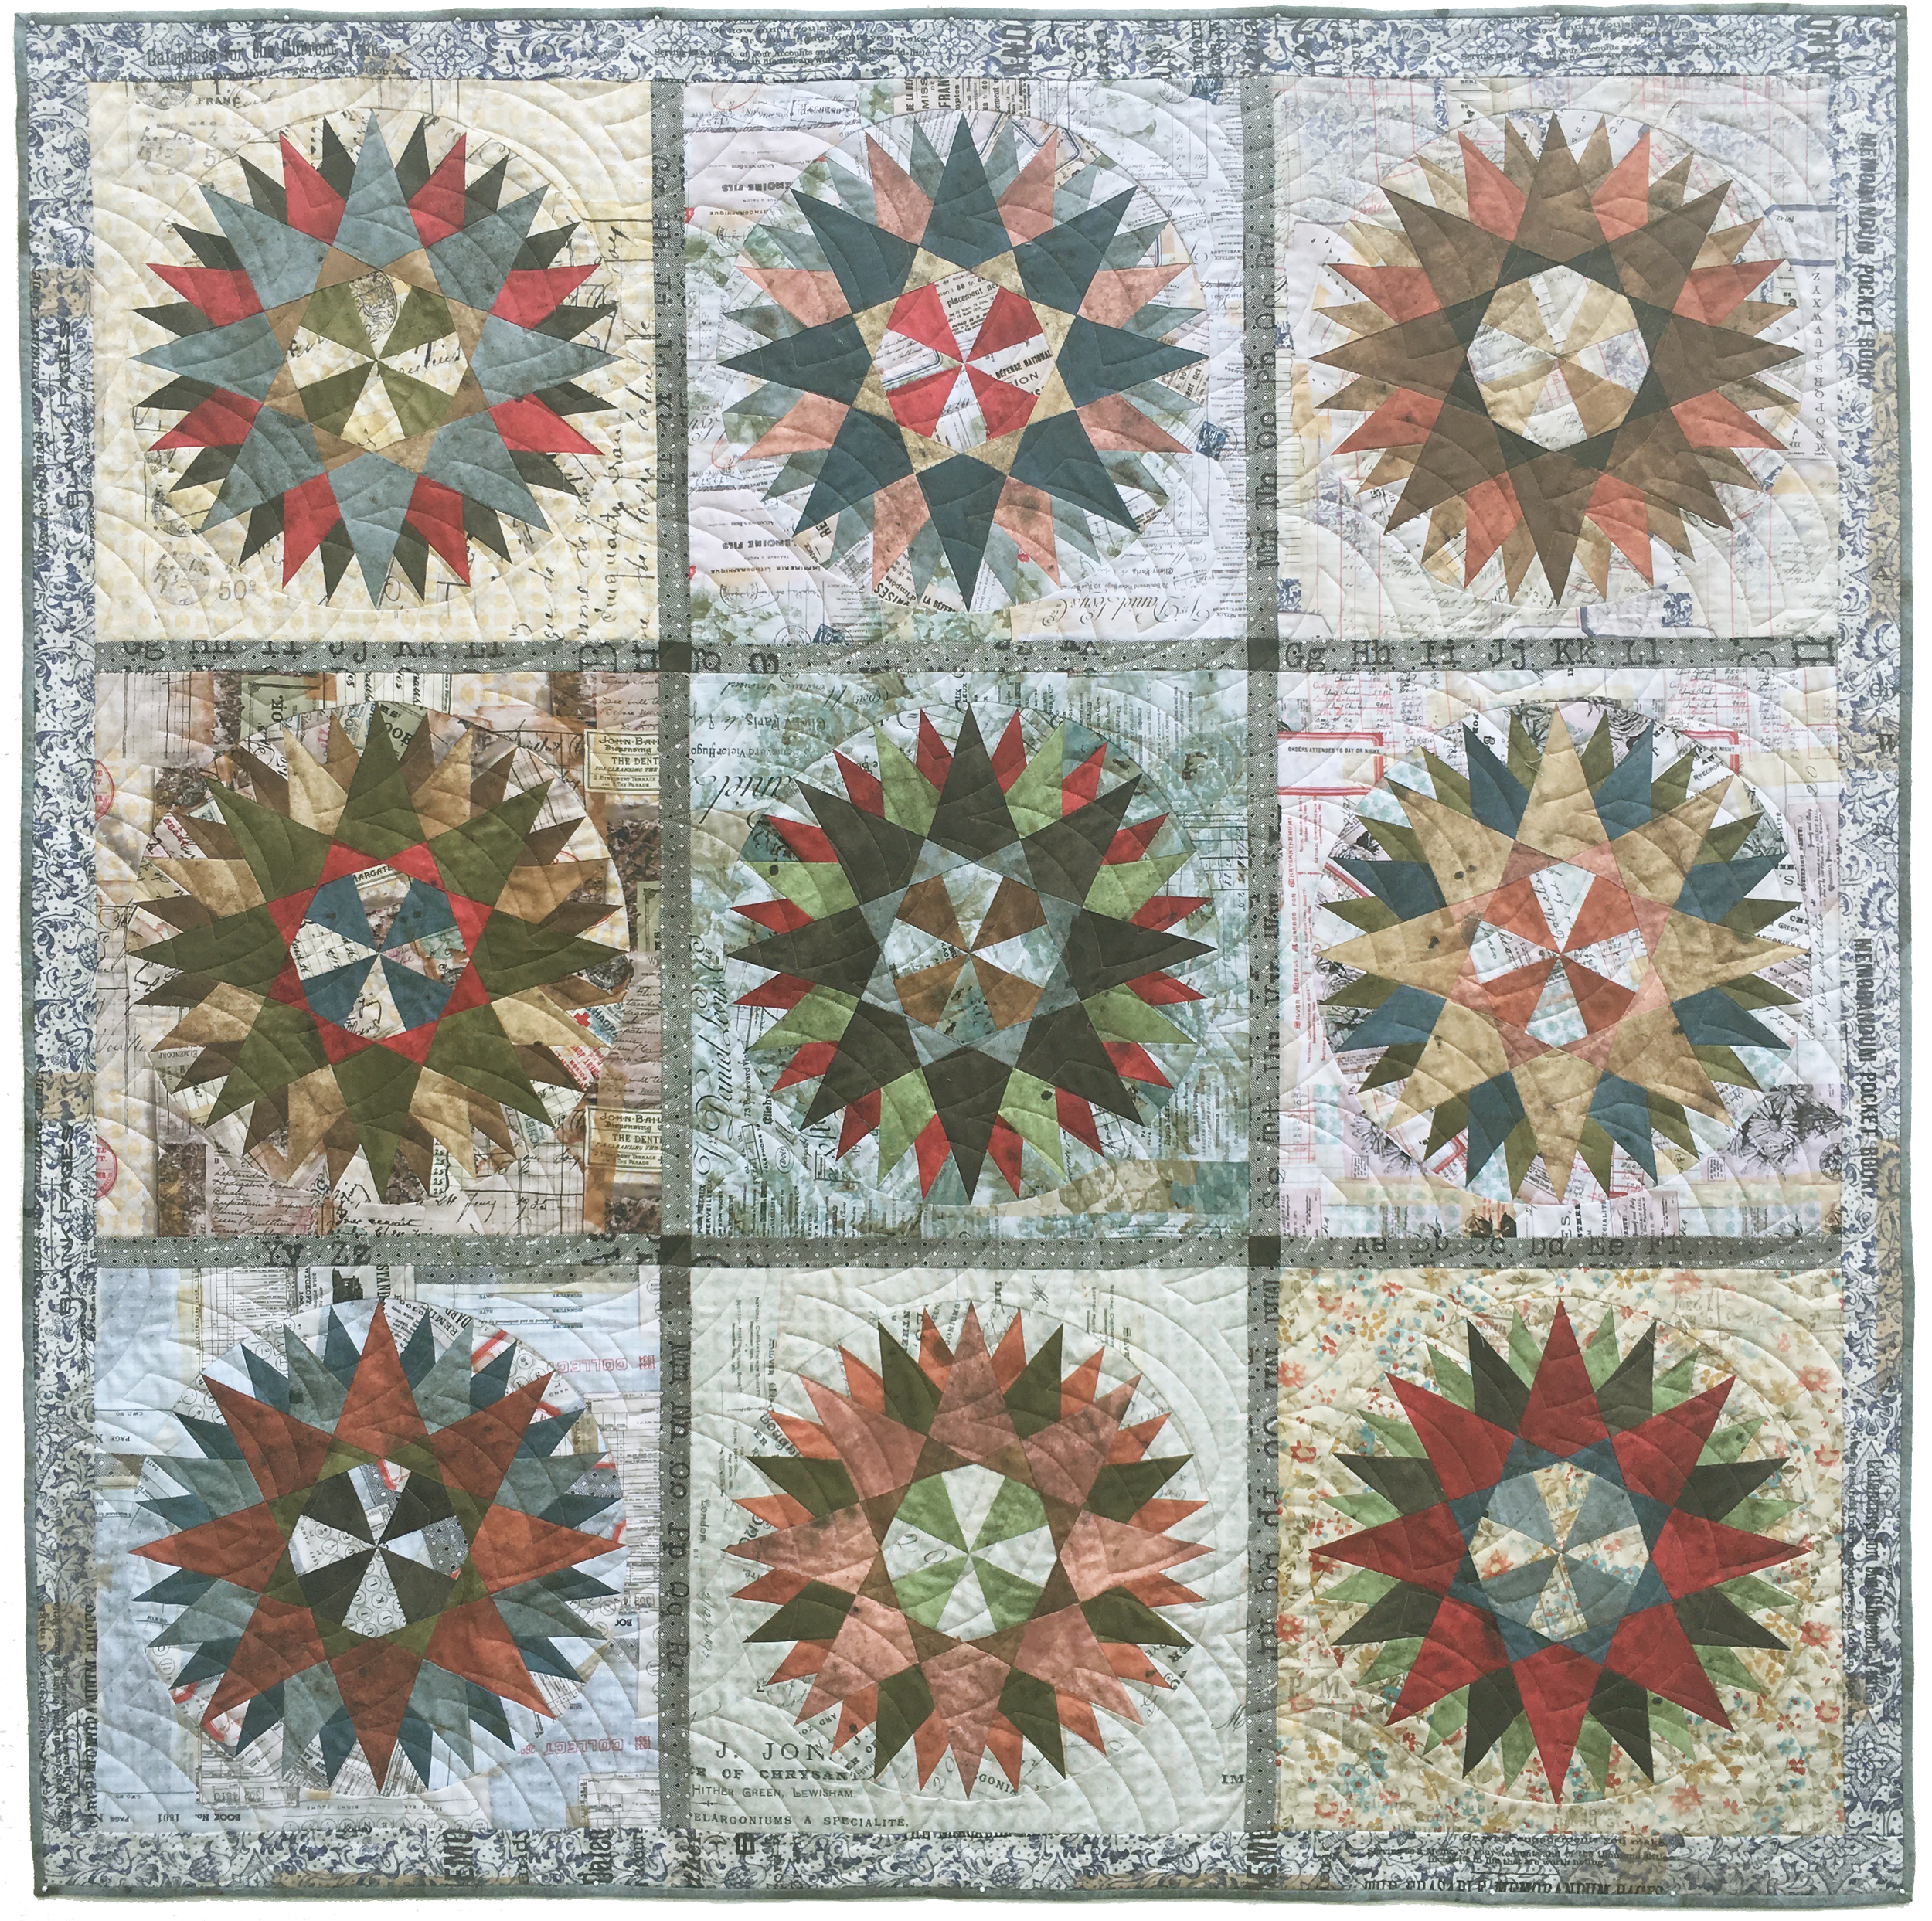 My Compass Collection "60x60" - Free pattern on my website